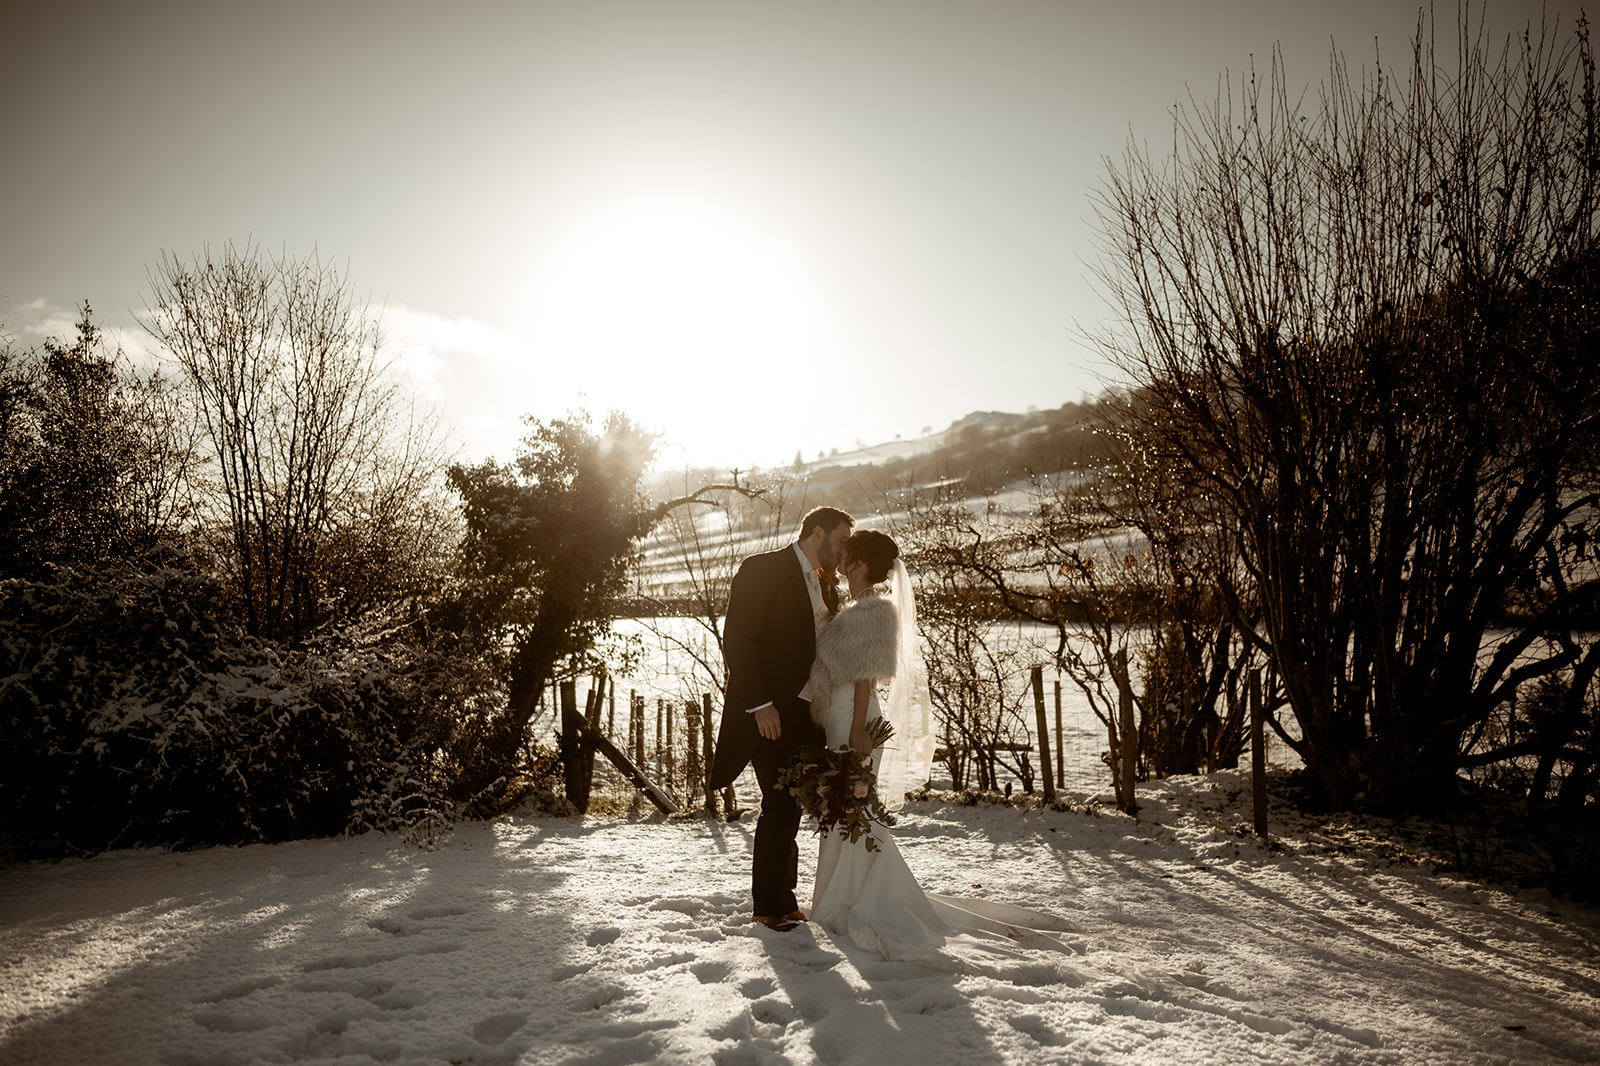 A couple kissing in the snow after getting married at The Gwenfrewi Project